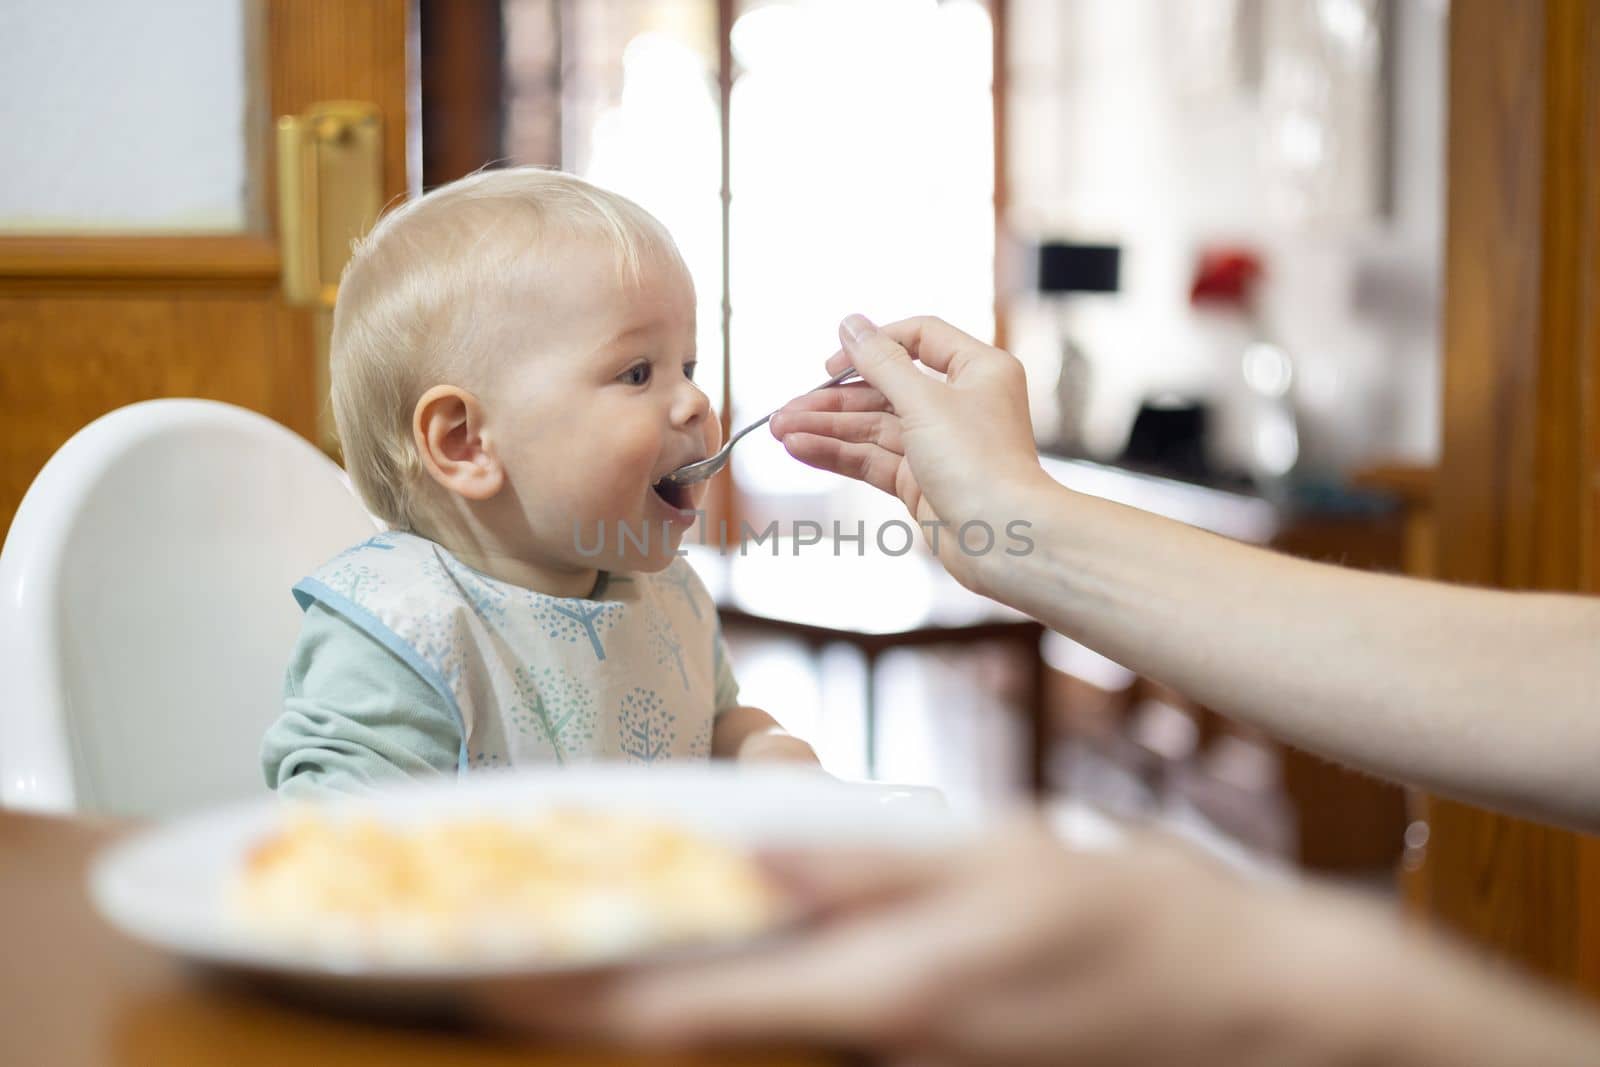 Mother spoon feeding her infant baby boy child sitting in high chair at the dining table in kitchen at home.